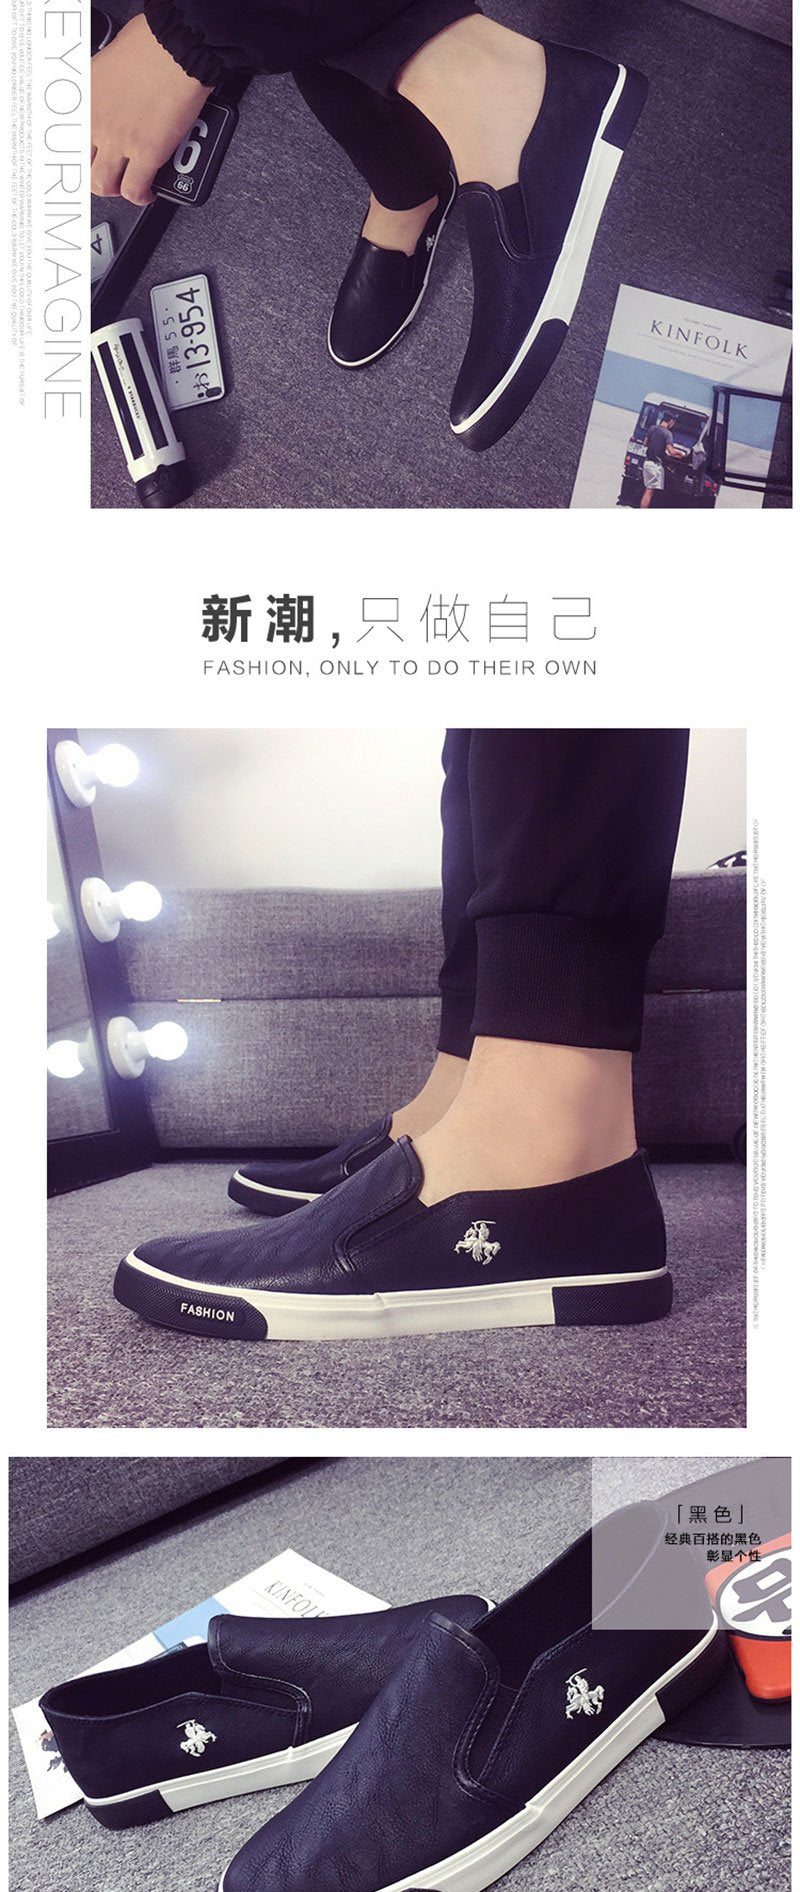 Casual Shoes Men Comfortable PU Leather Mens Loafers Handmade Design Flats Sneakers